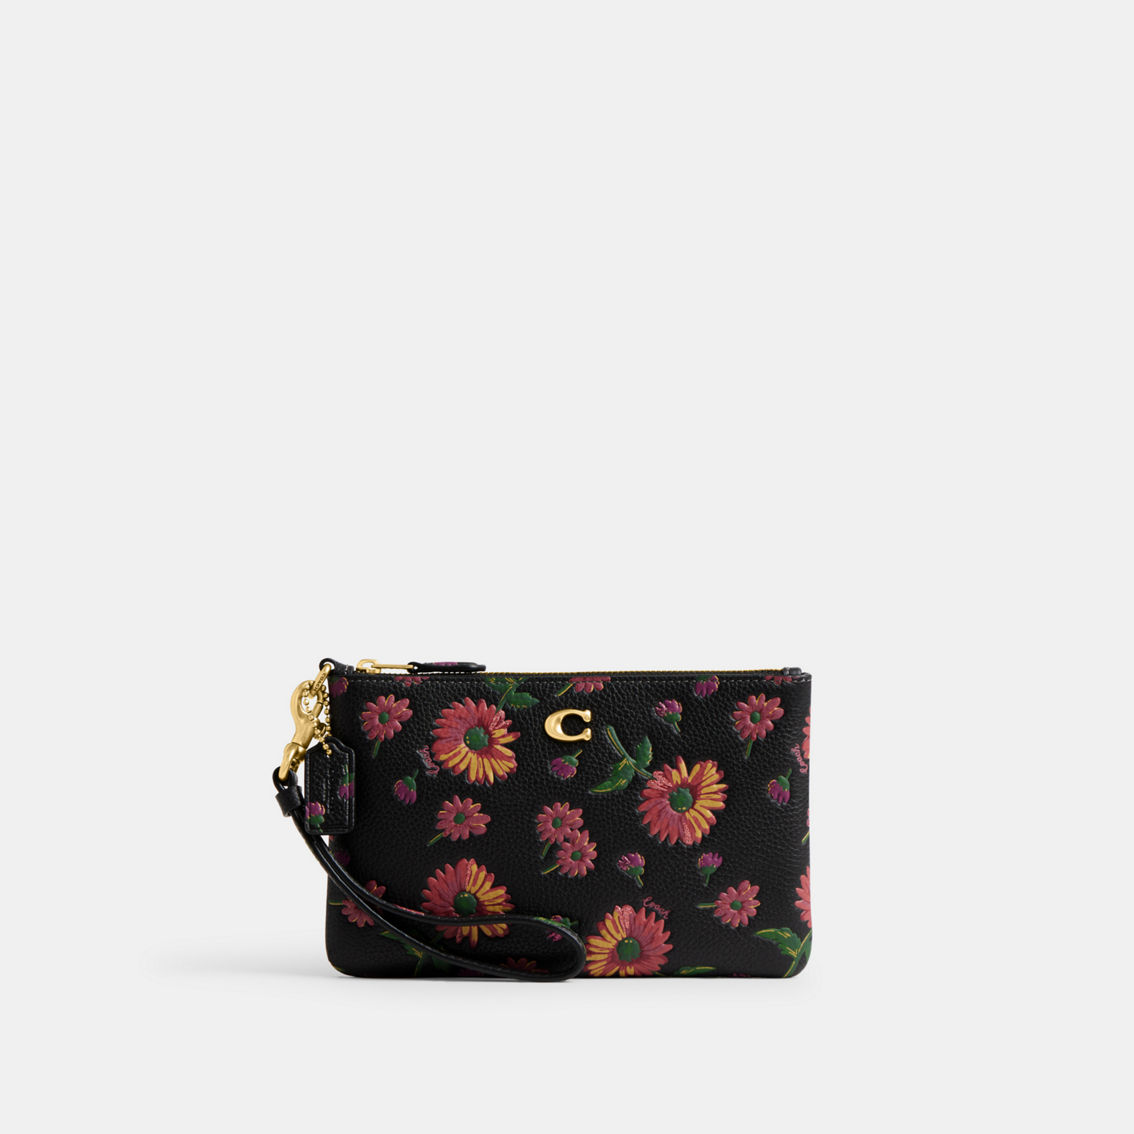 COACH Floral Printed Leather Small Wristlet